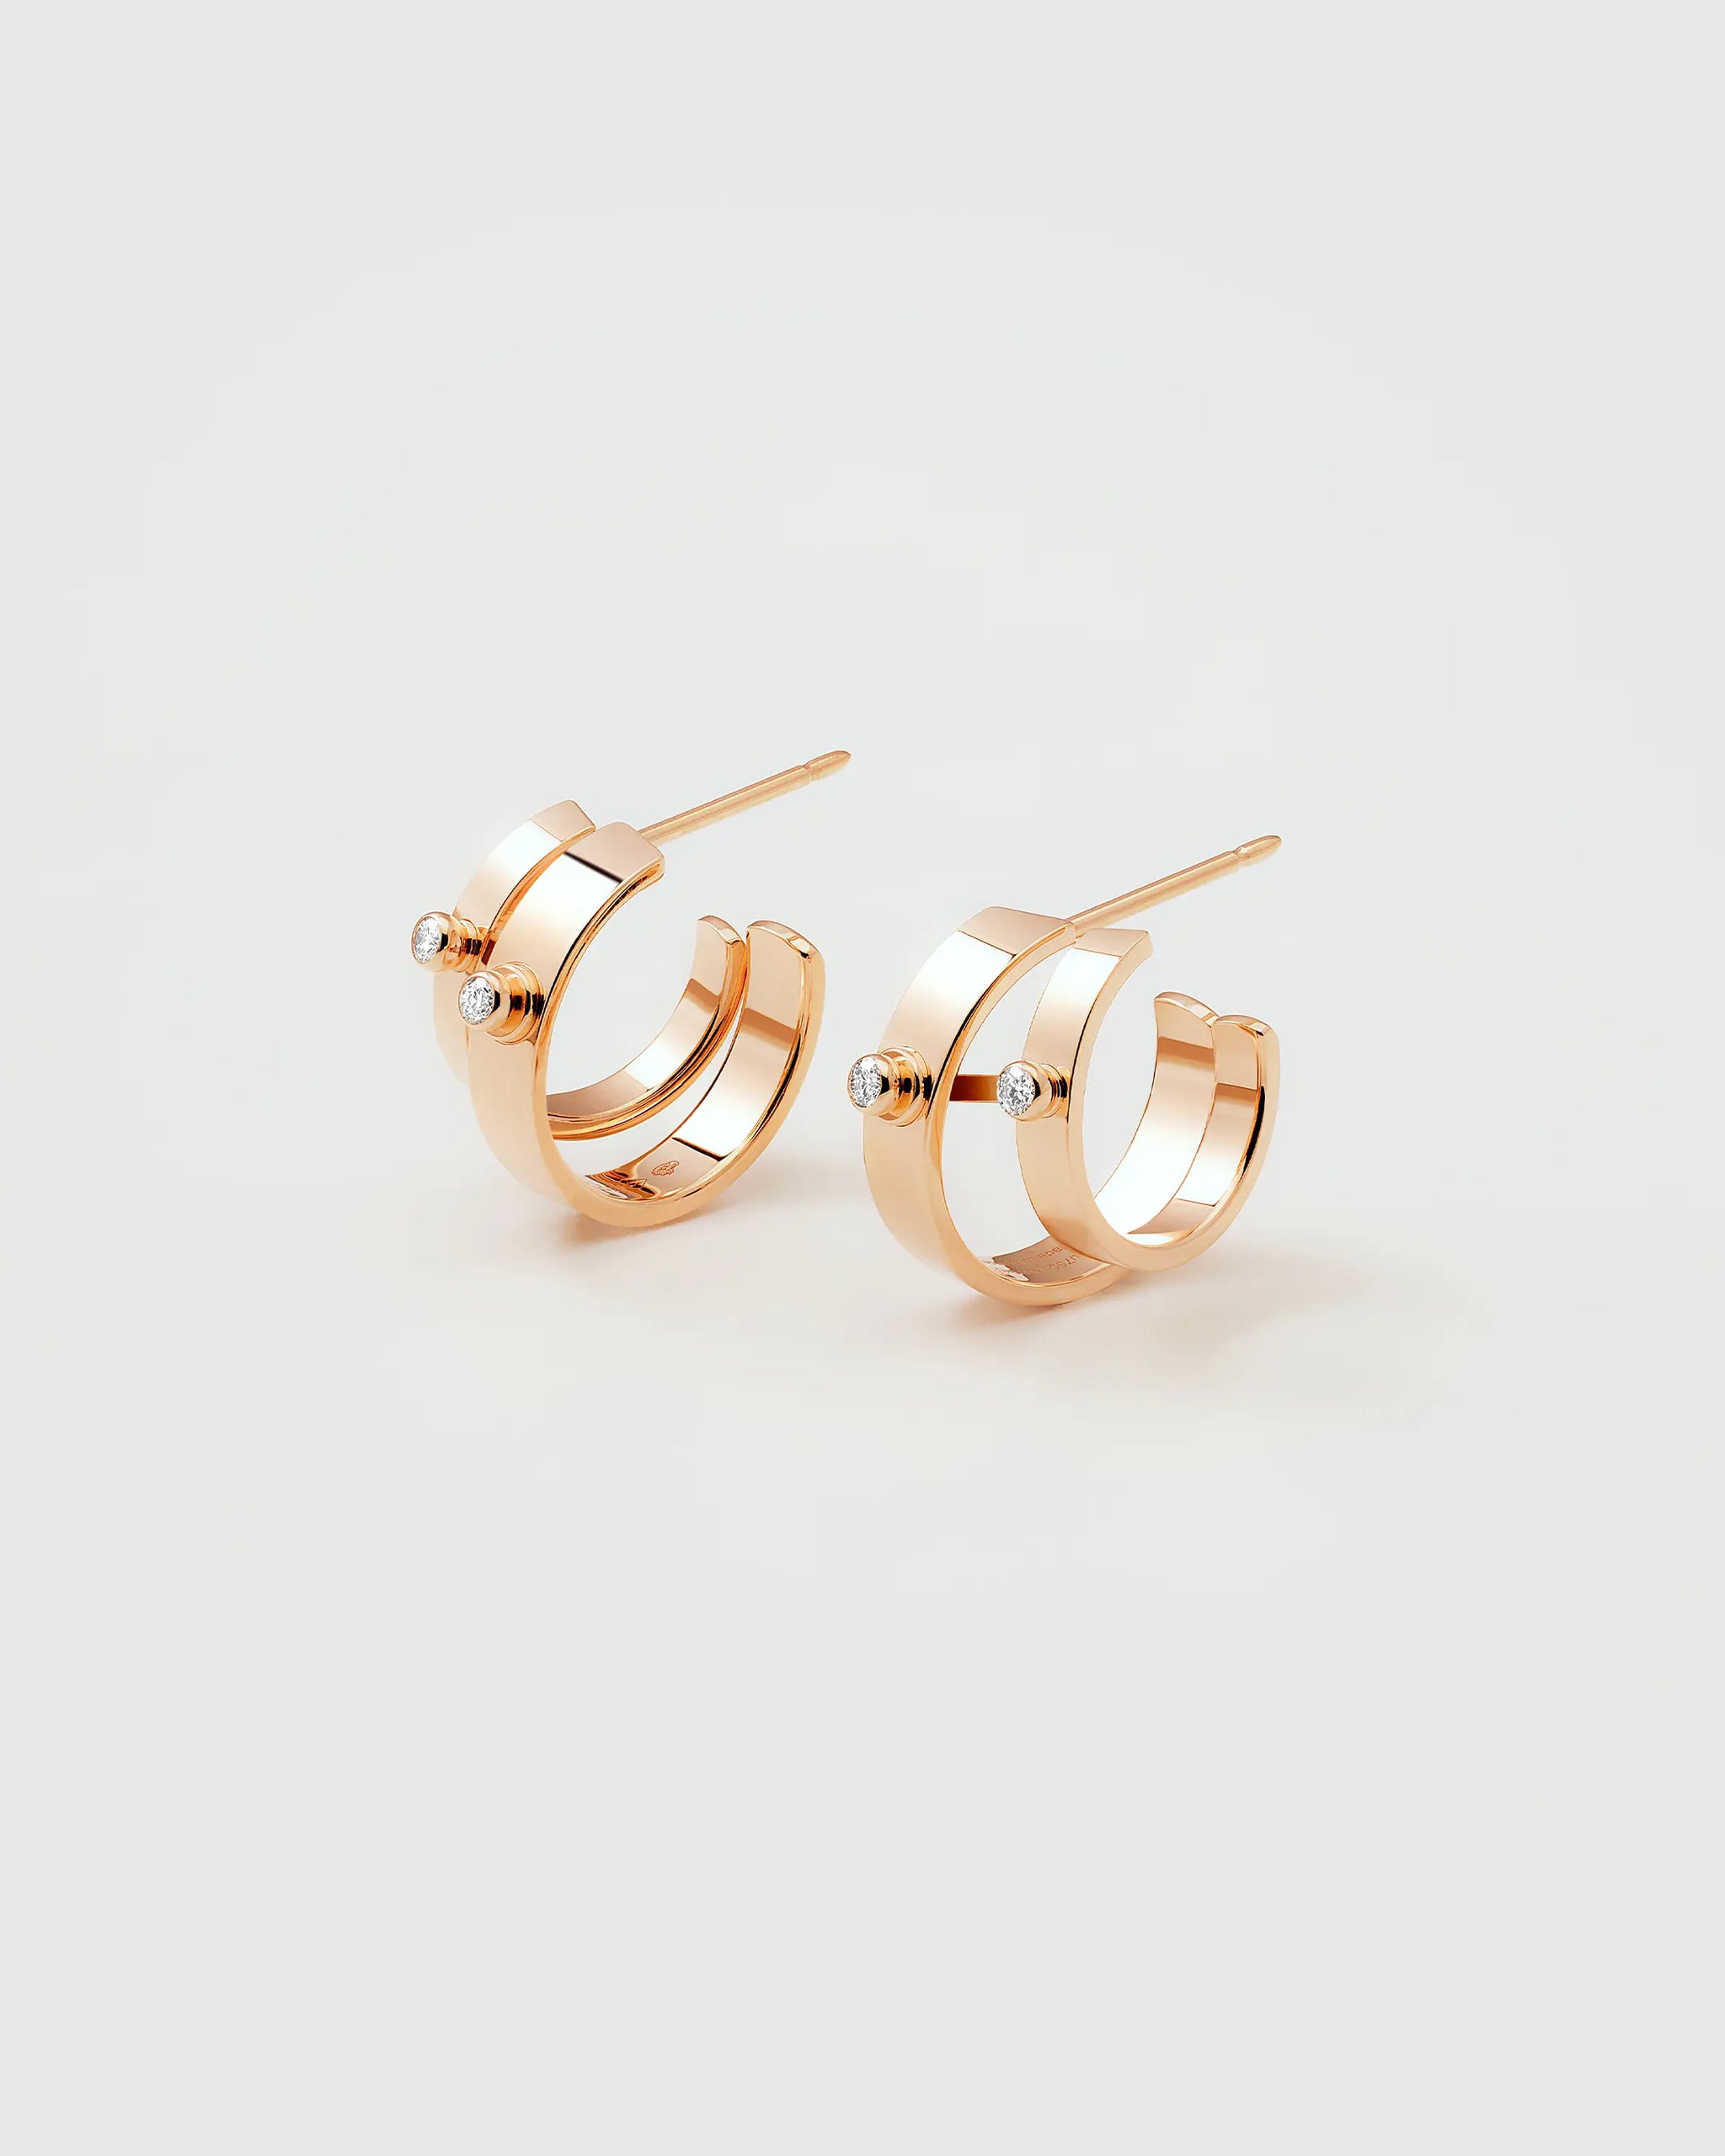 Monday Morning Mood Double Hoops in Rose Gold - 1 - Nouvel Heritage